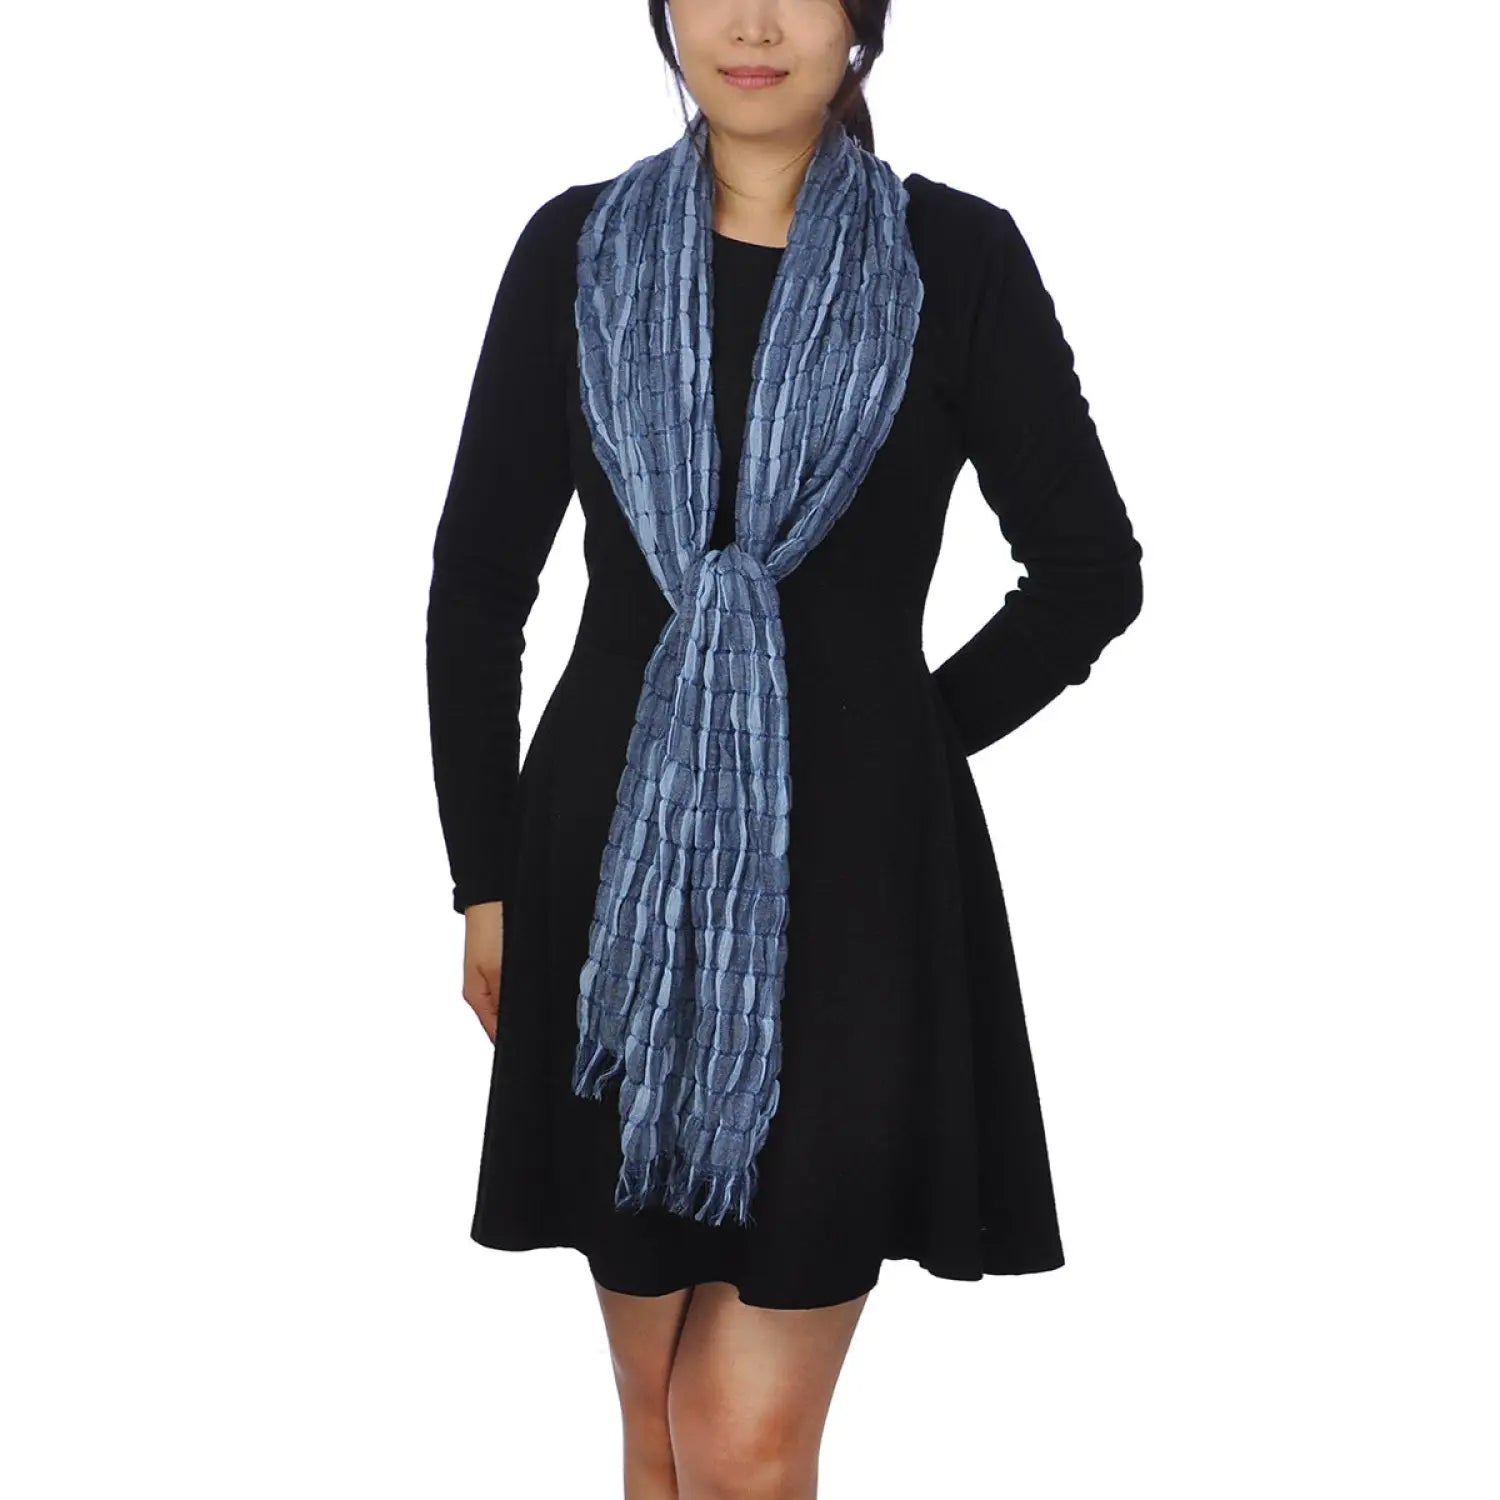 Woman wearing a blue textured check print scarf